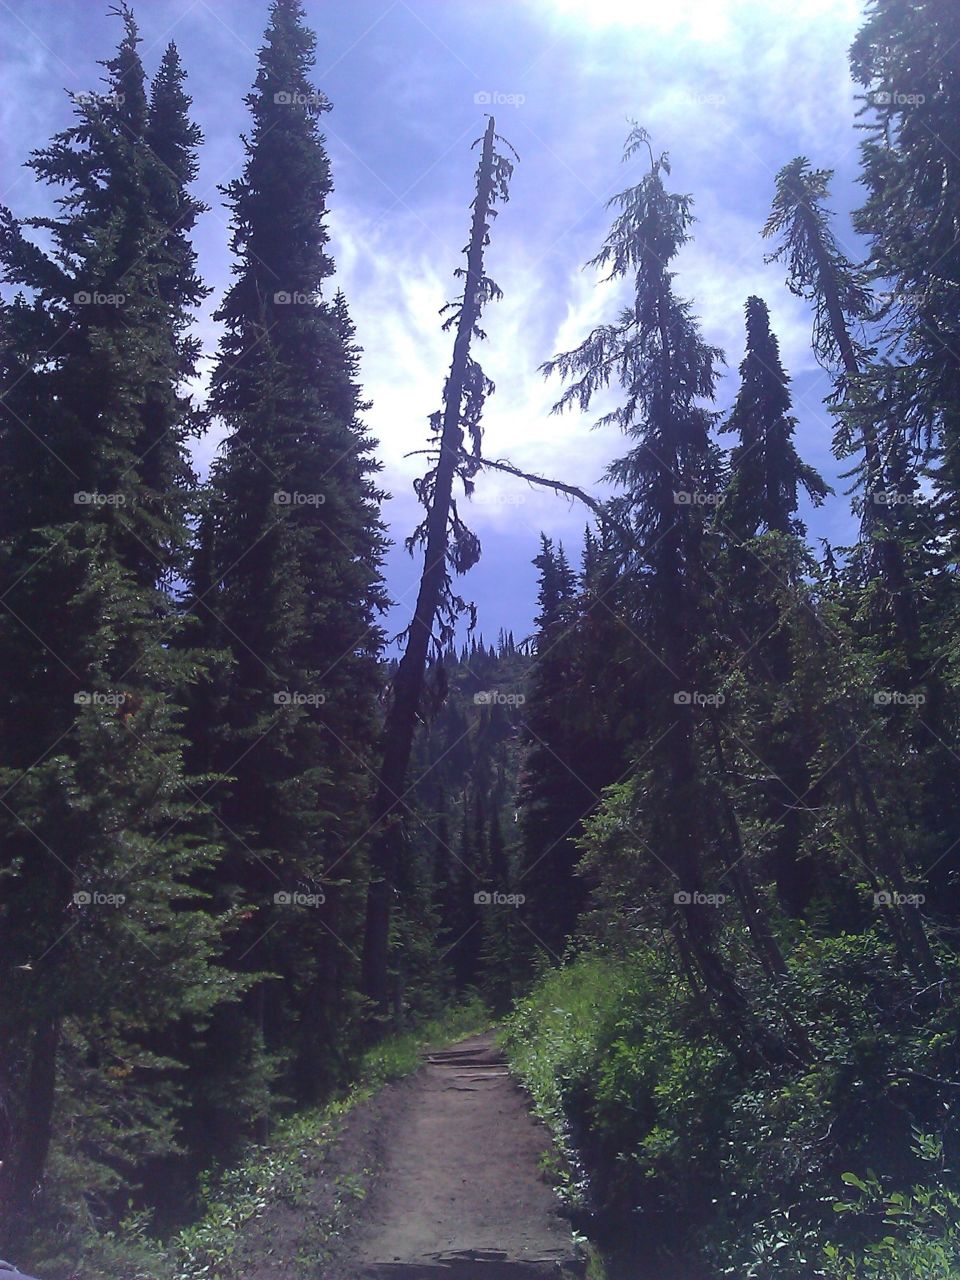 Trees Overlooking A Path. Hiking in the Mt. Rainier National Forest I came across several trees overlooking the trail I was on.